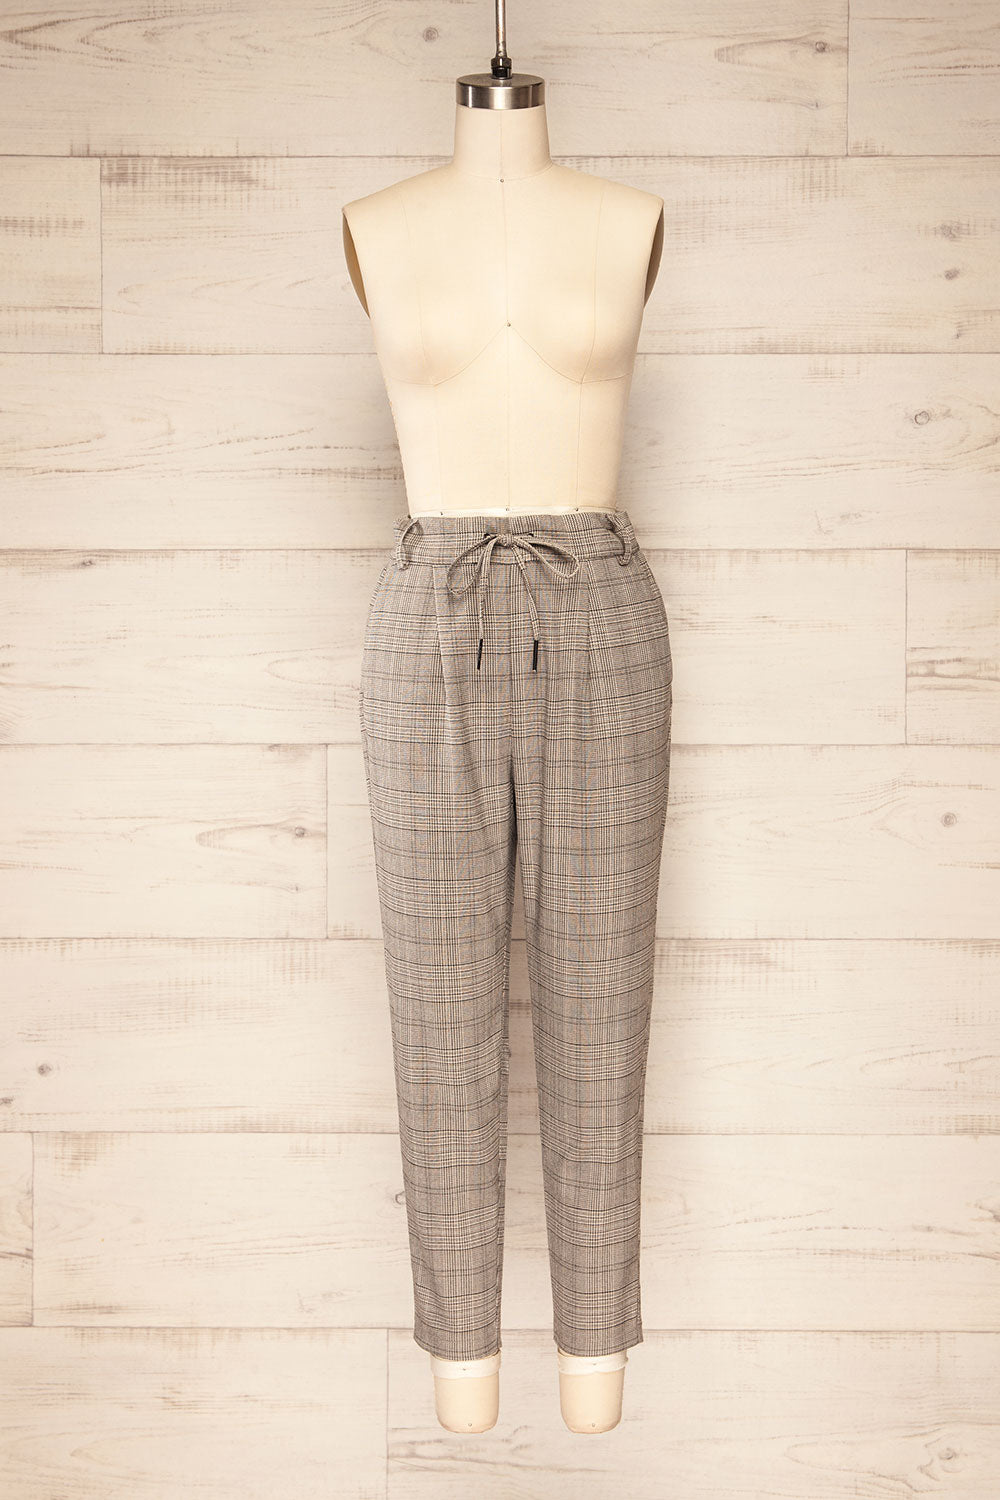 Camla Barcelona Chequered Grey Low Rise Jegging | Buy SIZE S Jegging Online  for | Glamly